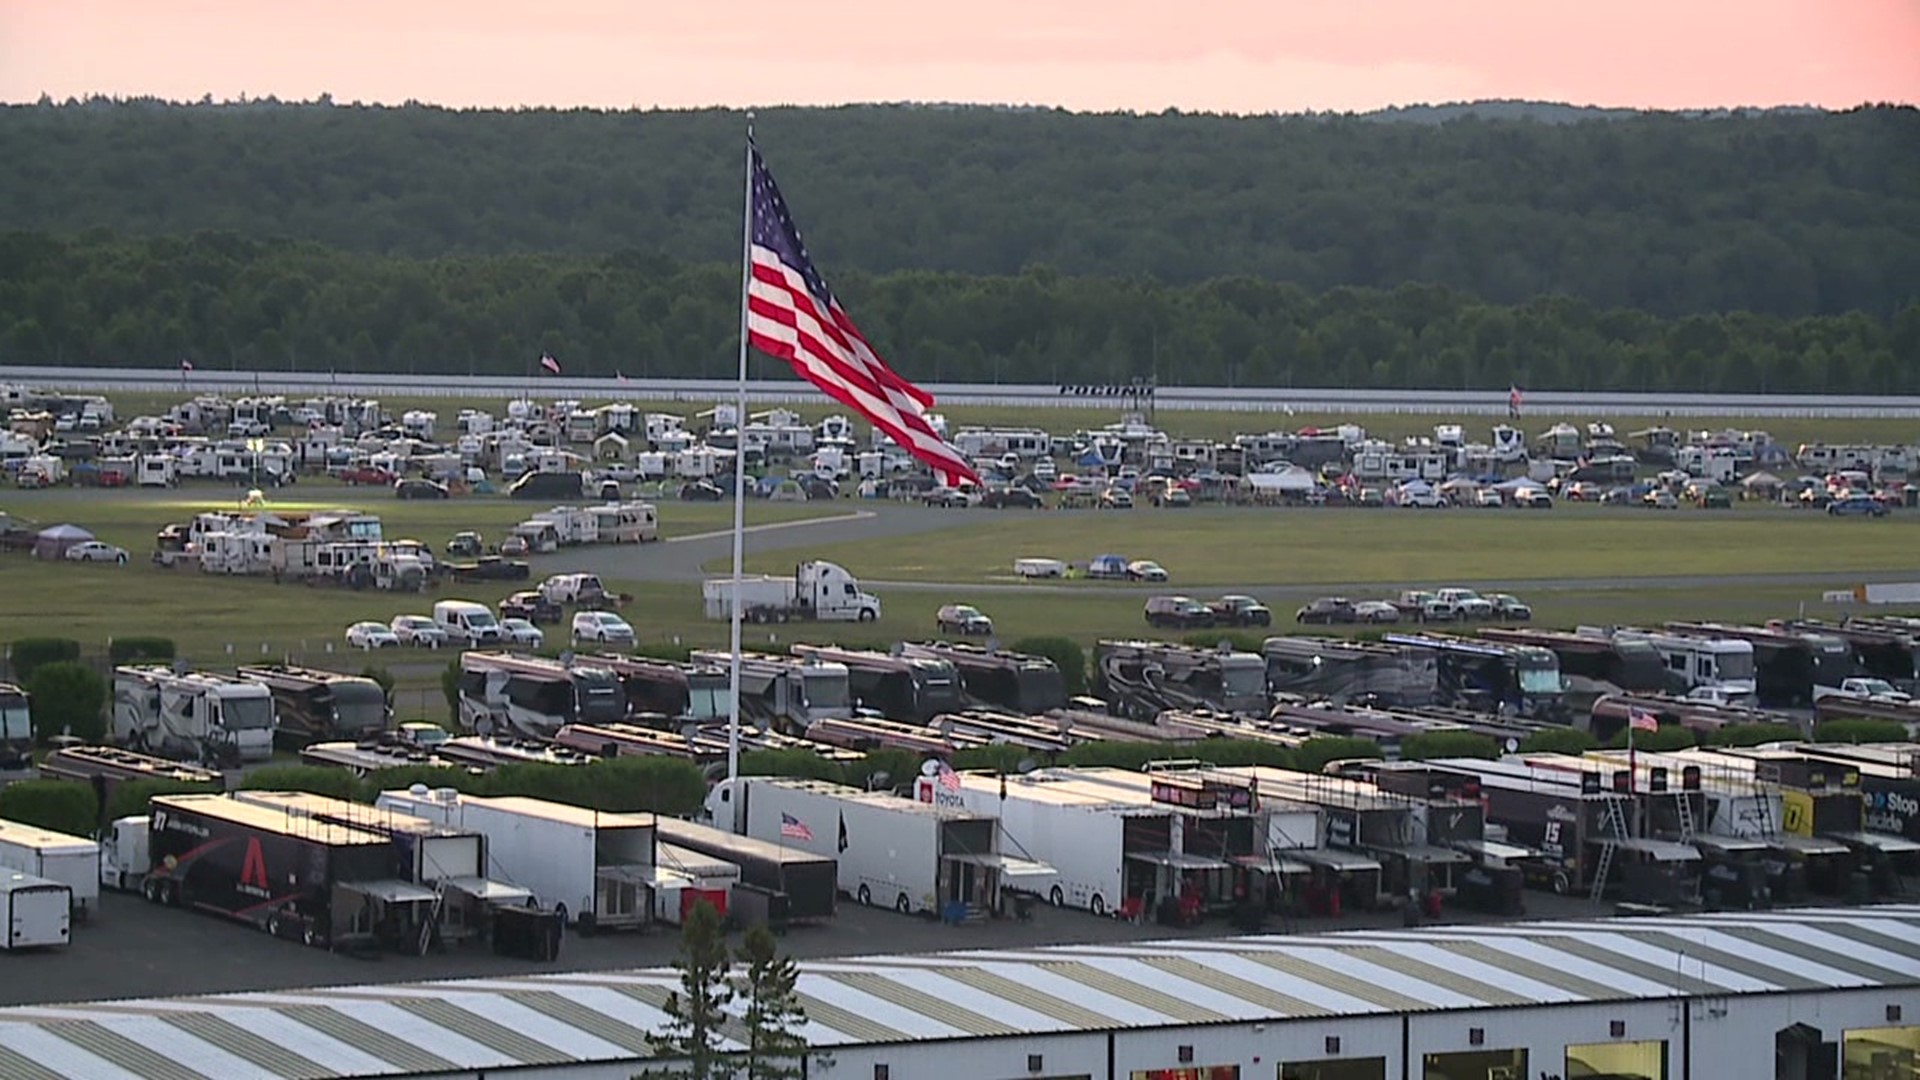 It's the only chance to see a NASCAR event in Pennsylvania this season.